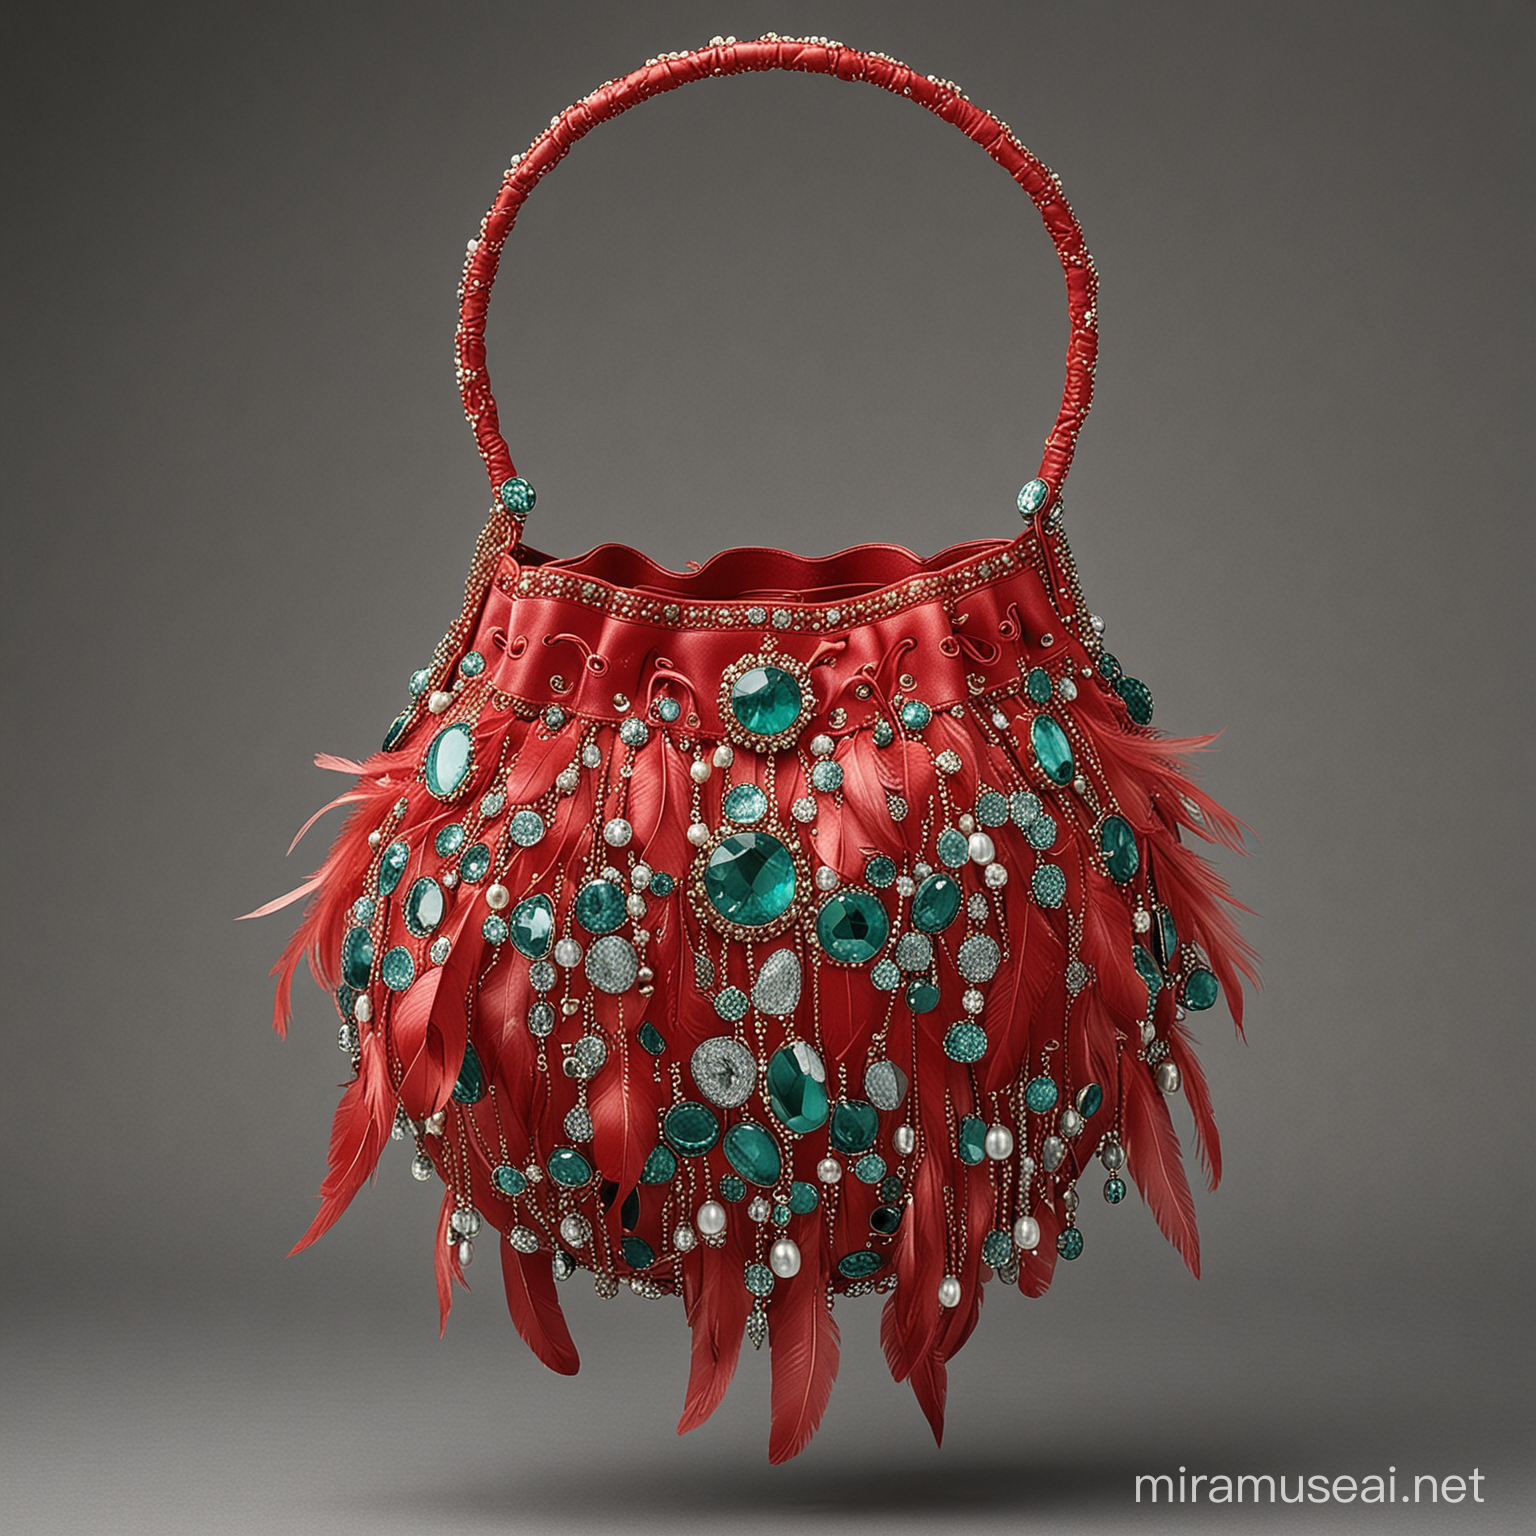 Luxurious Circular Couture Handbag with Green Water Diamonds and Phoenix Feathers